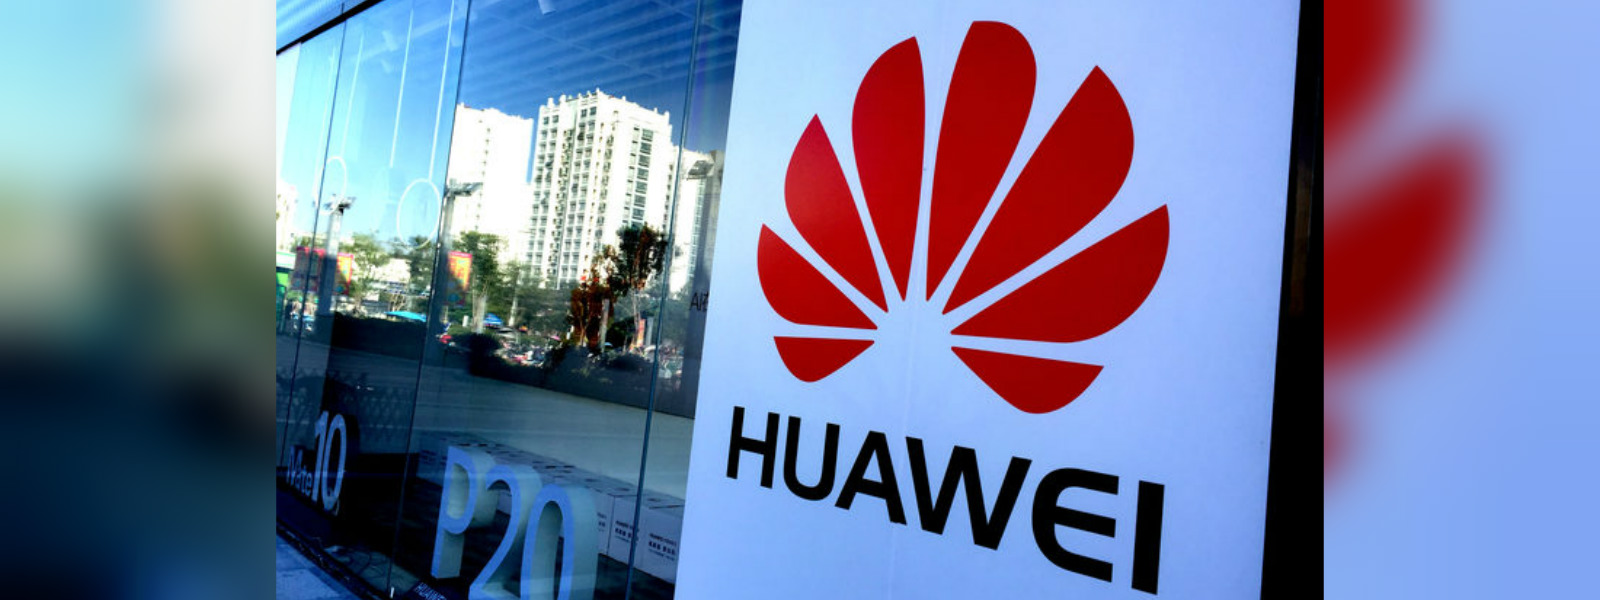 Huawei well prepared to cope with U.S. restrictions: expert